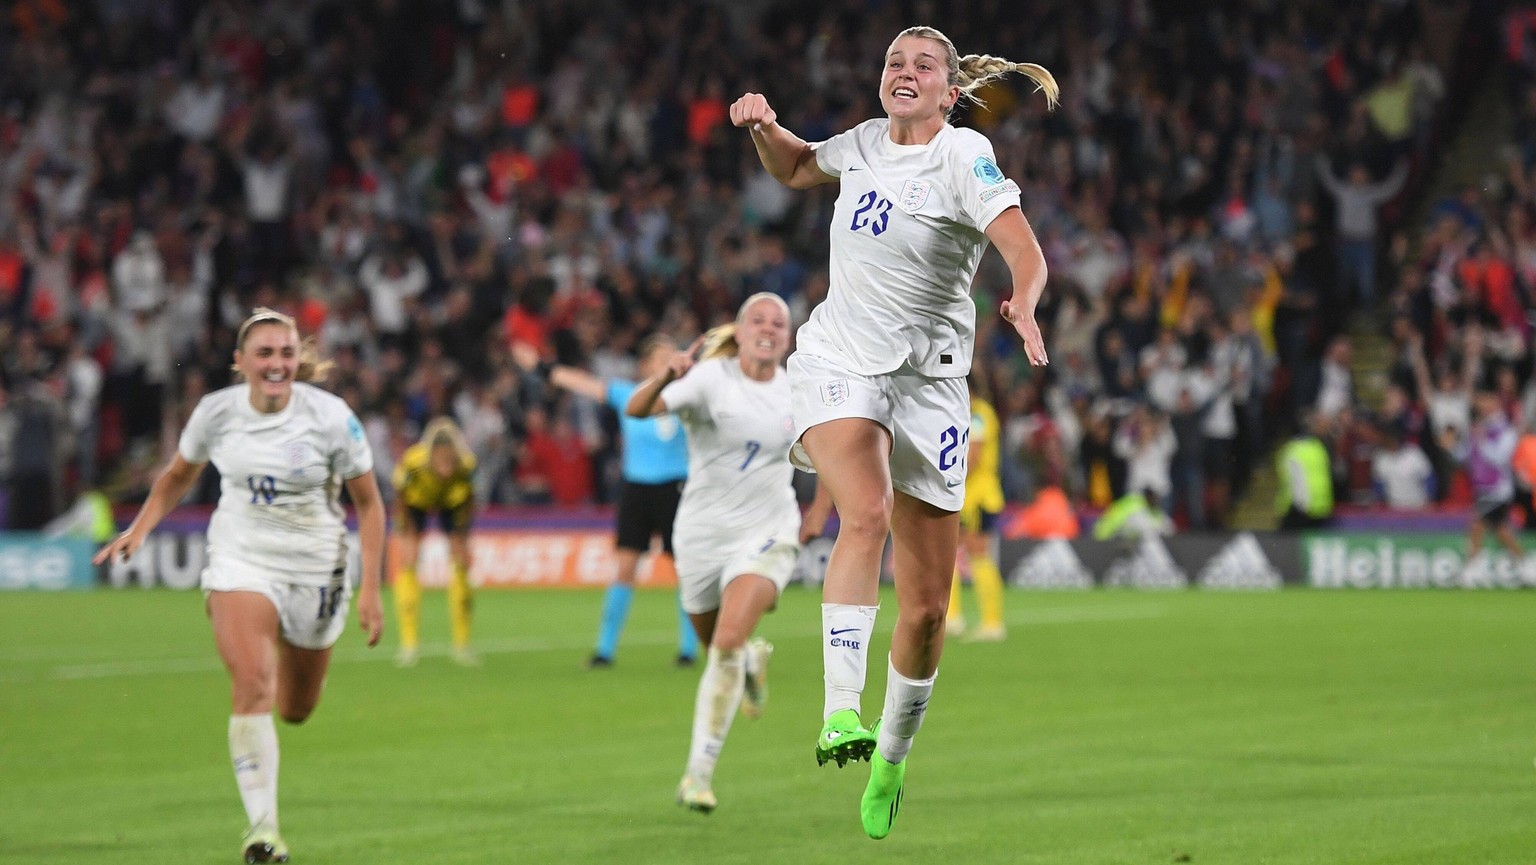 Mandatory Credit: Photo by Anna Gowthorpe/Shutterstock (13048100an) Alessia Russo of England celebrates scoring her side s third goal England v Sweden, Womens UEFA European Championship, EM, Europamei ...